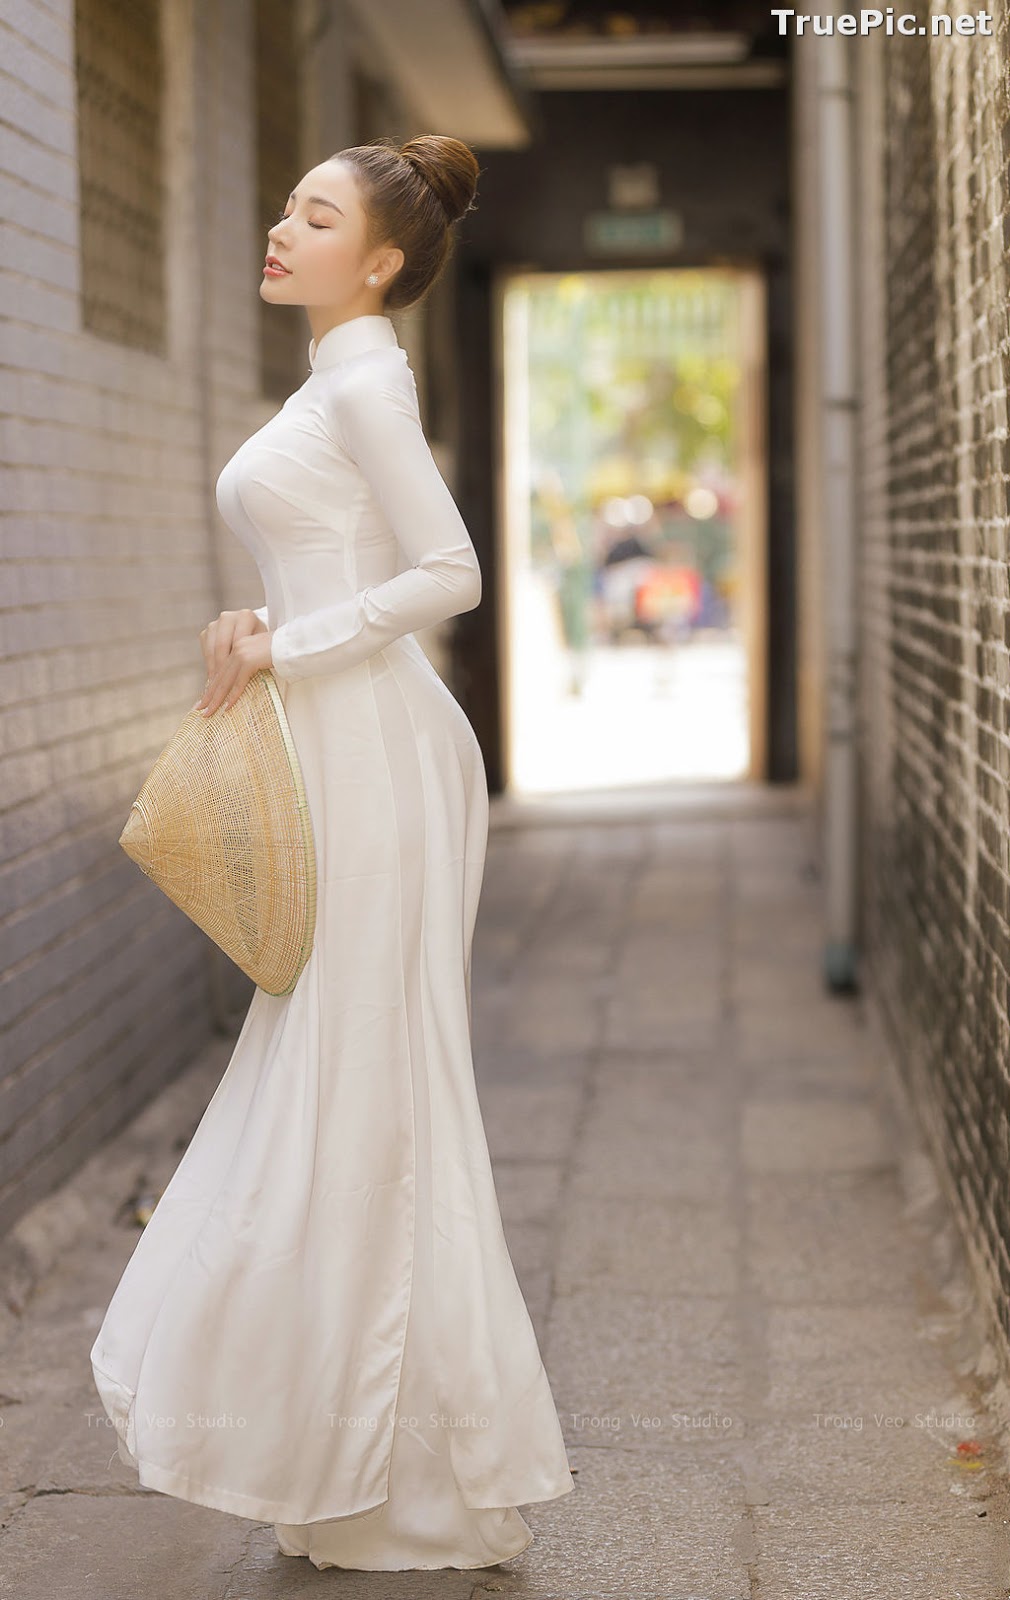 Image The Beauty of Vietnamese Girls with Traditional Dress (Ao Dai) #2 - TruePic.net - Picture-45